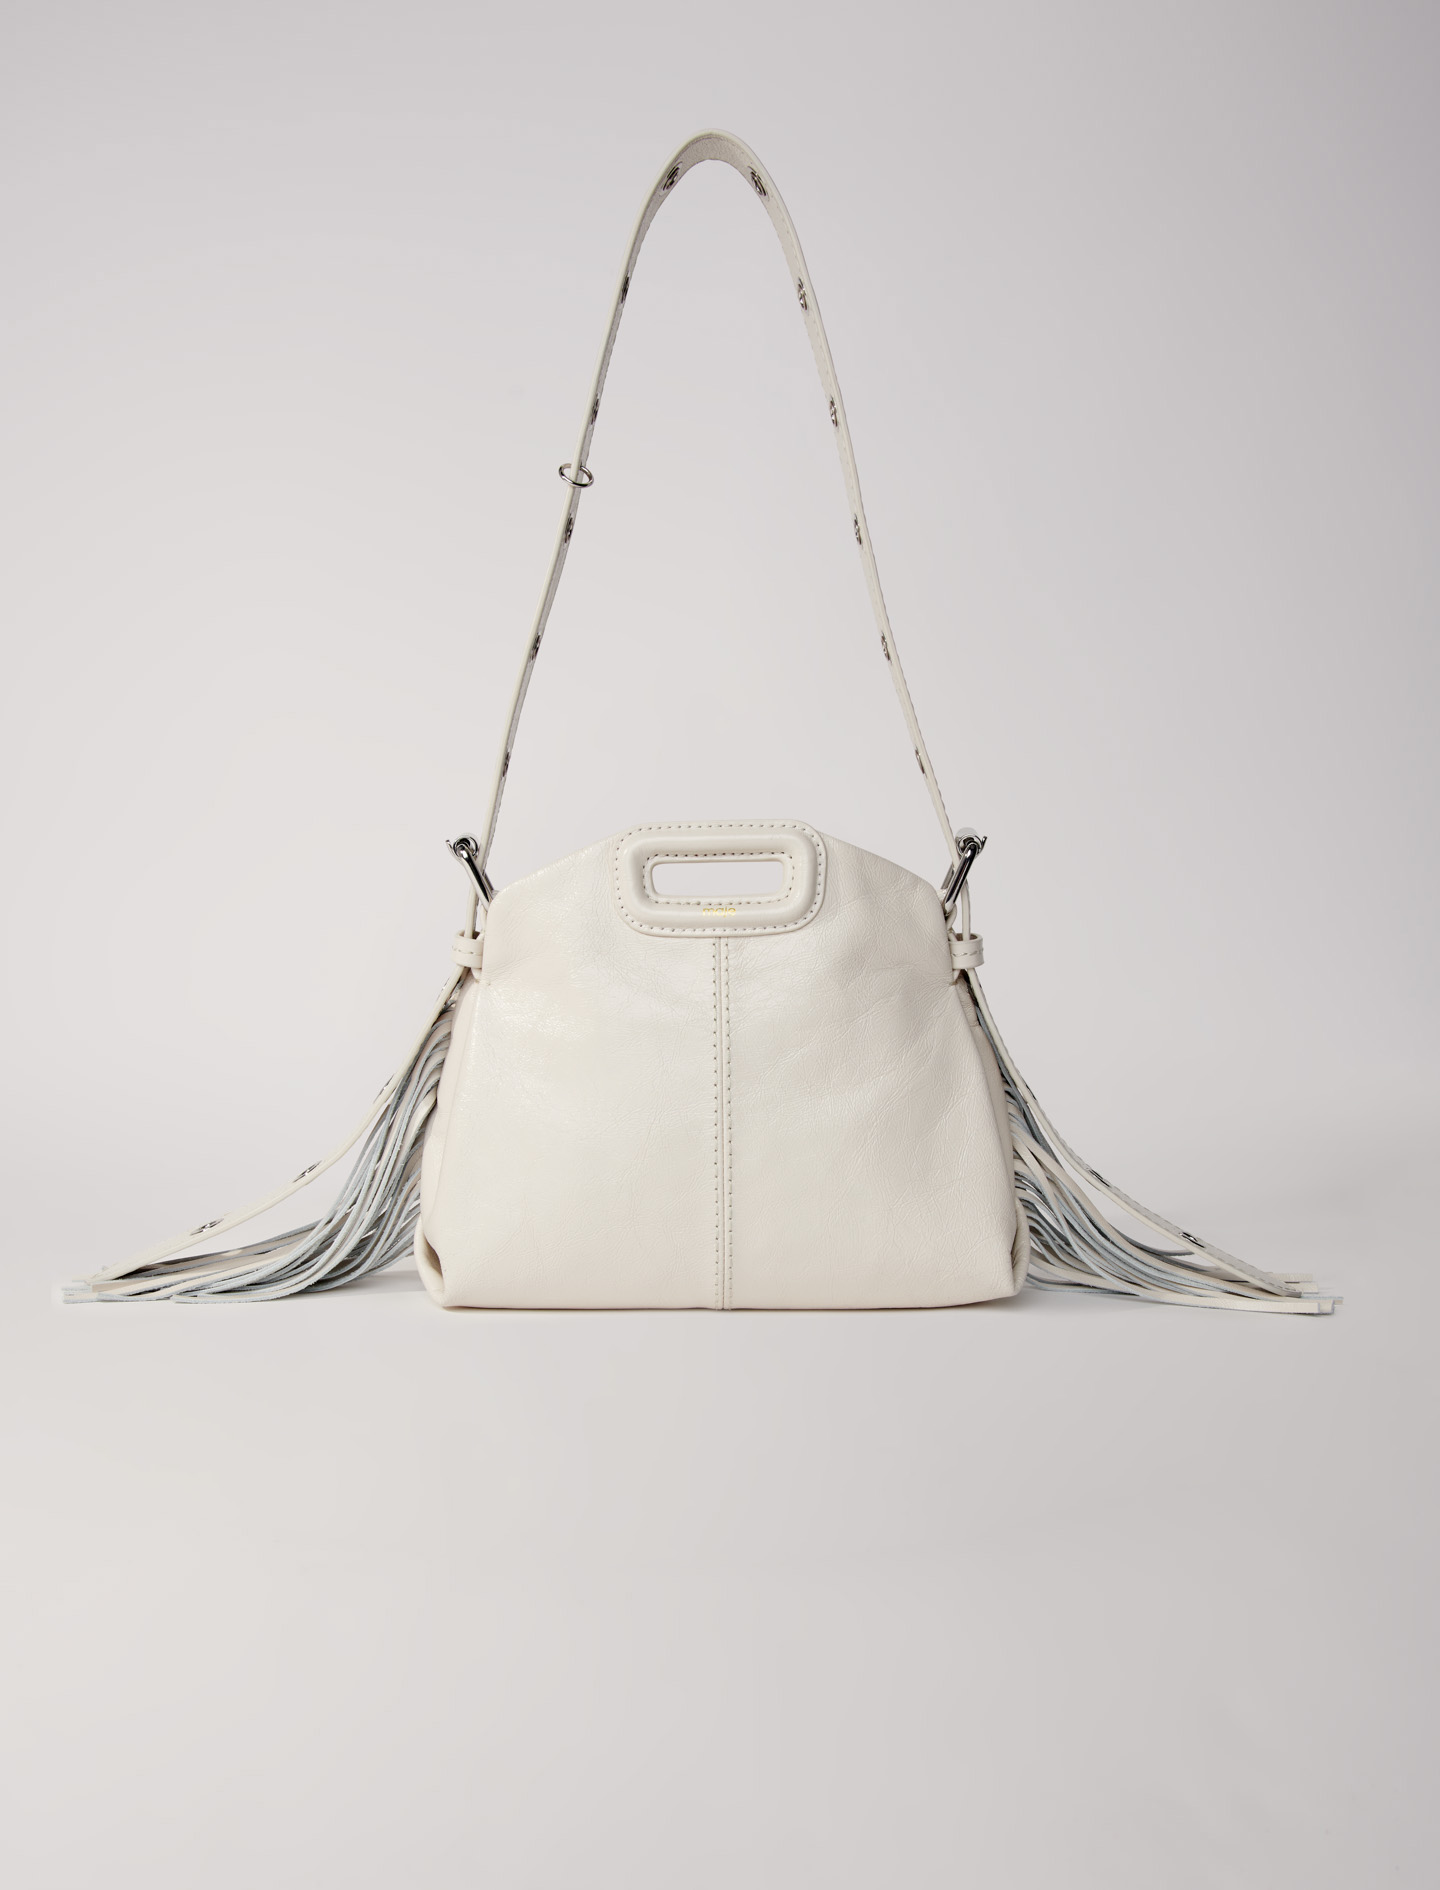 Mixte's polyester Leather: Crackle leather mini Miss M bag for Spring/Summer, size Mixte-All Bags-OS (ONE SIZE), in color White / White